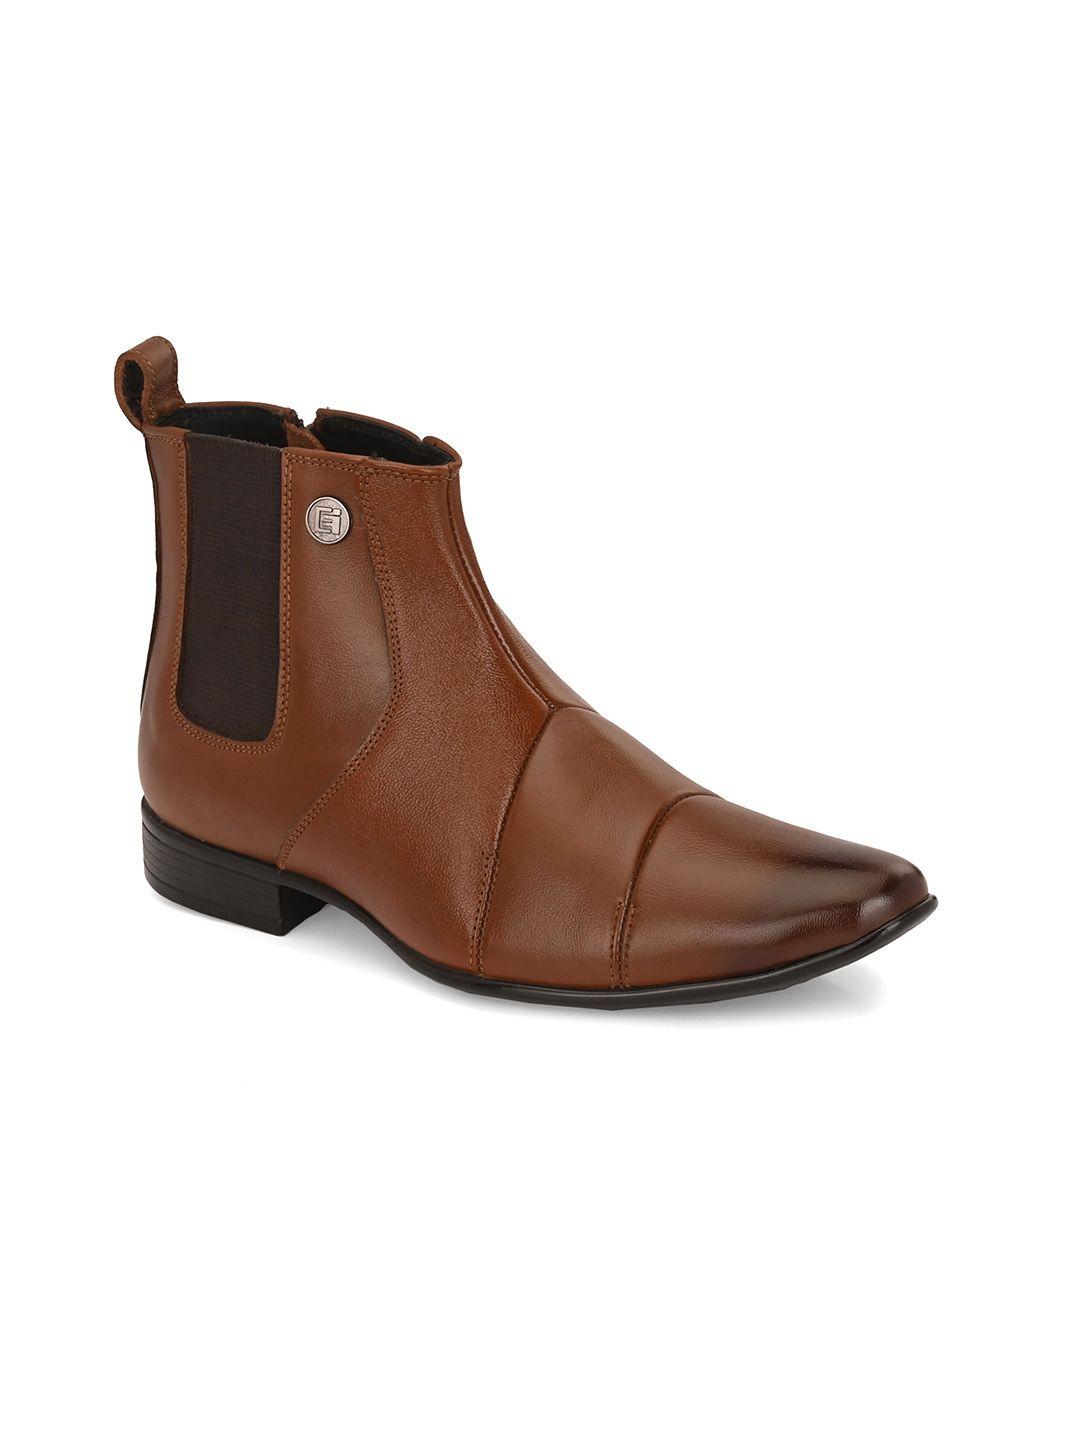 eego italy men textured genuine leather chelsea boots